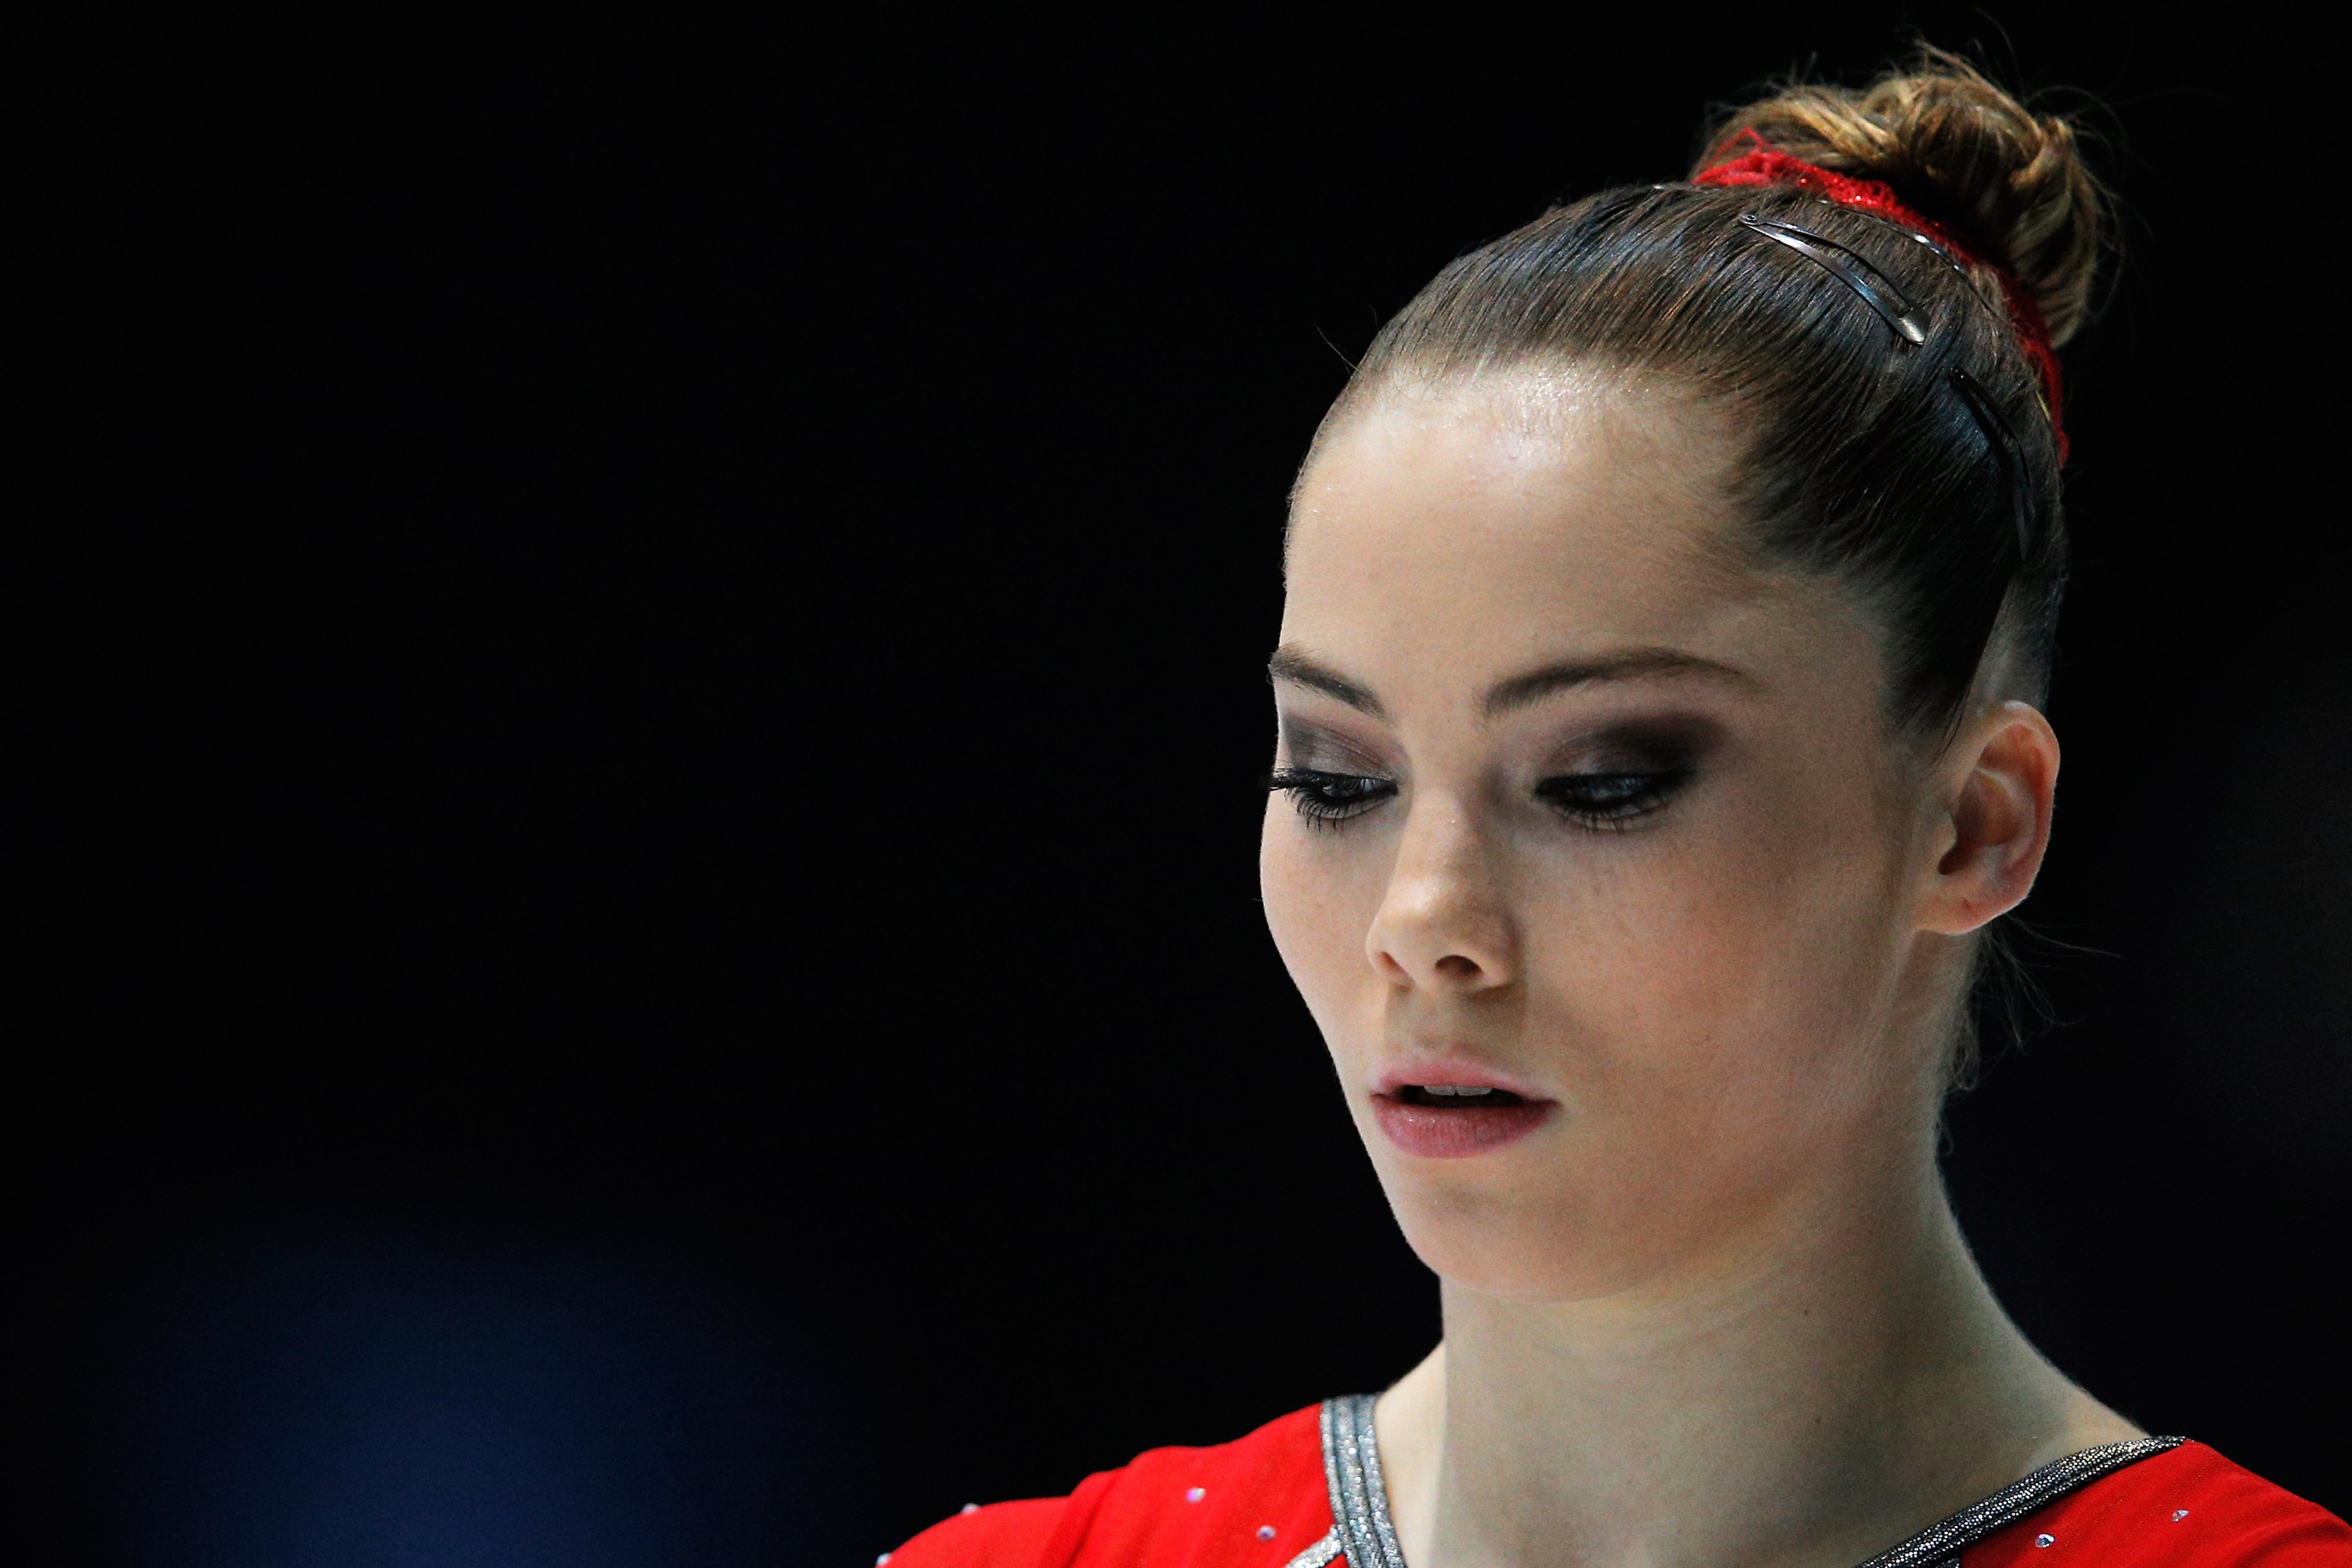 Maroney competing at the world gymnastics championships in 2013 in Antwerpen, Belgium (Dean Mouhtaropoulos—Getty Images)